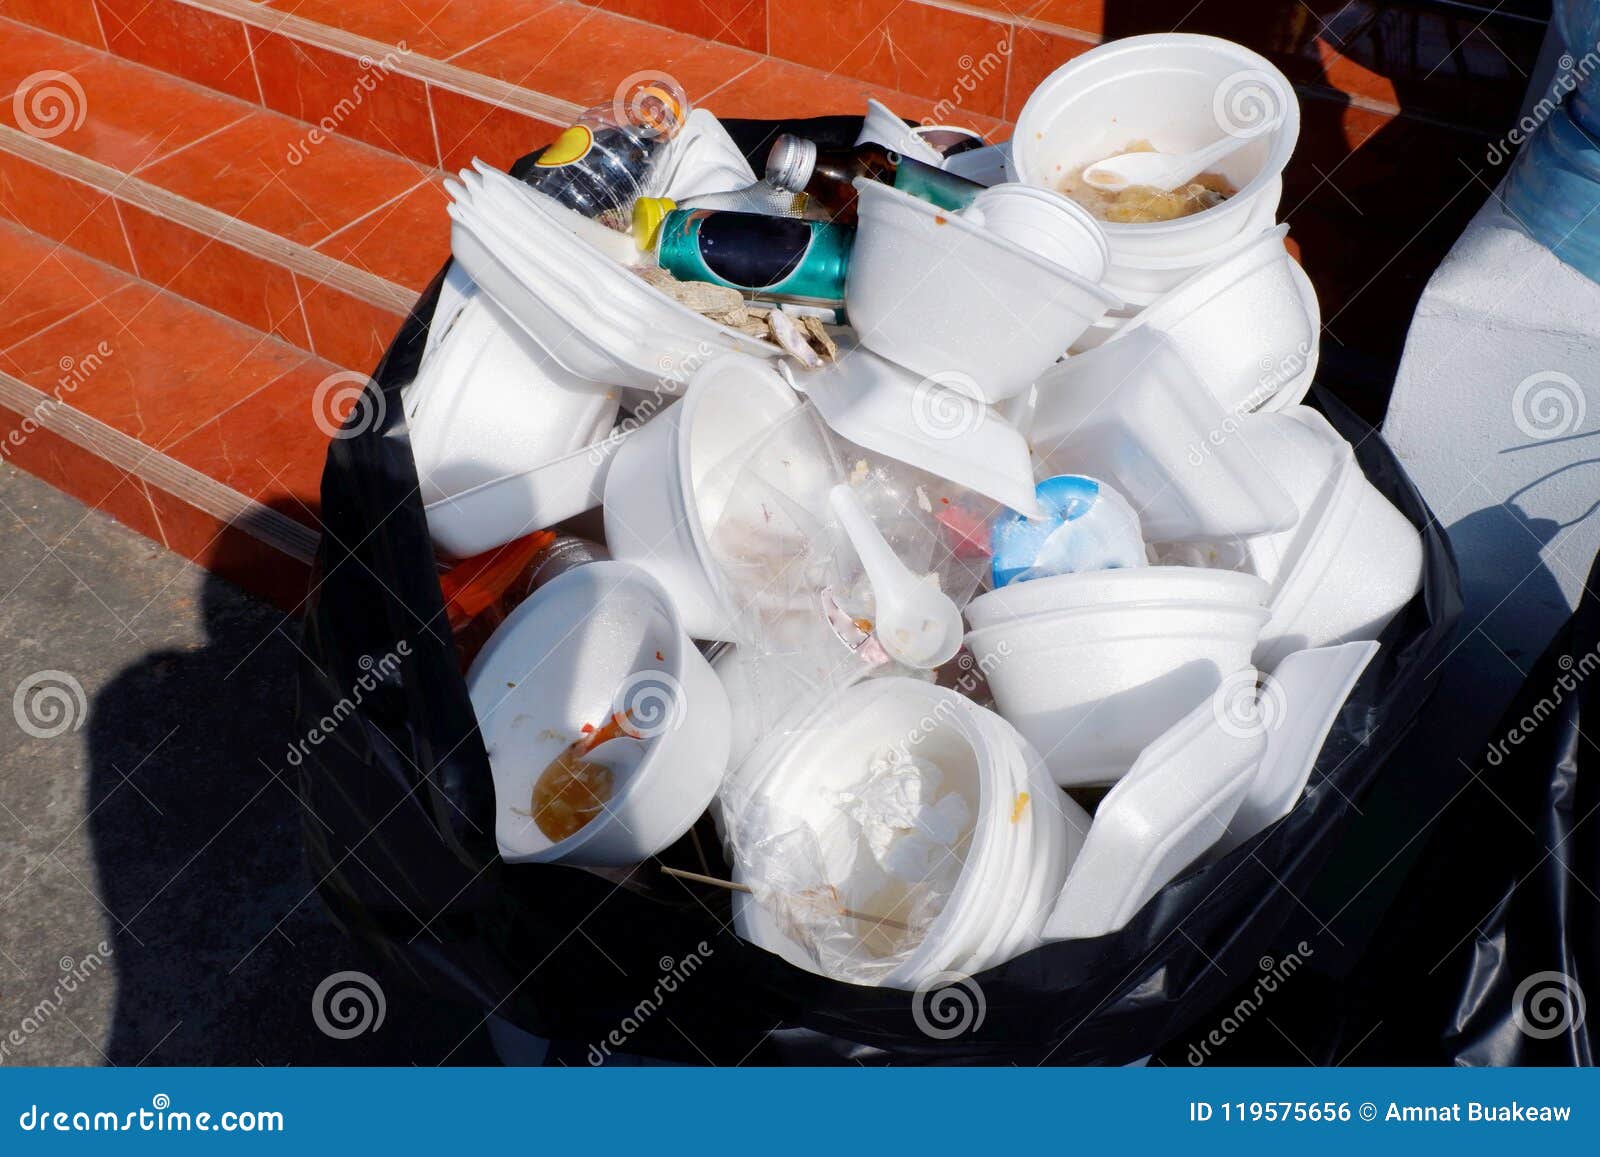 waste foam tray and plastic, waste garbage foam food tray white many pile on the plastic black bag dirty, bin, trash, recycle